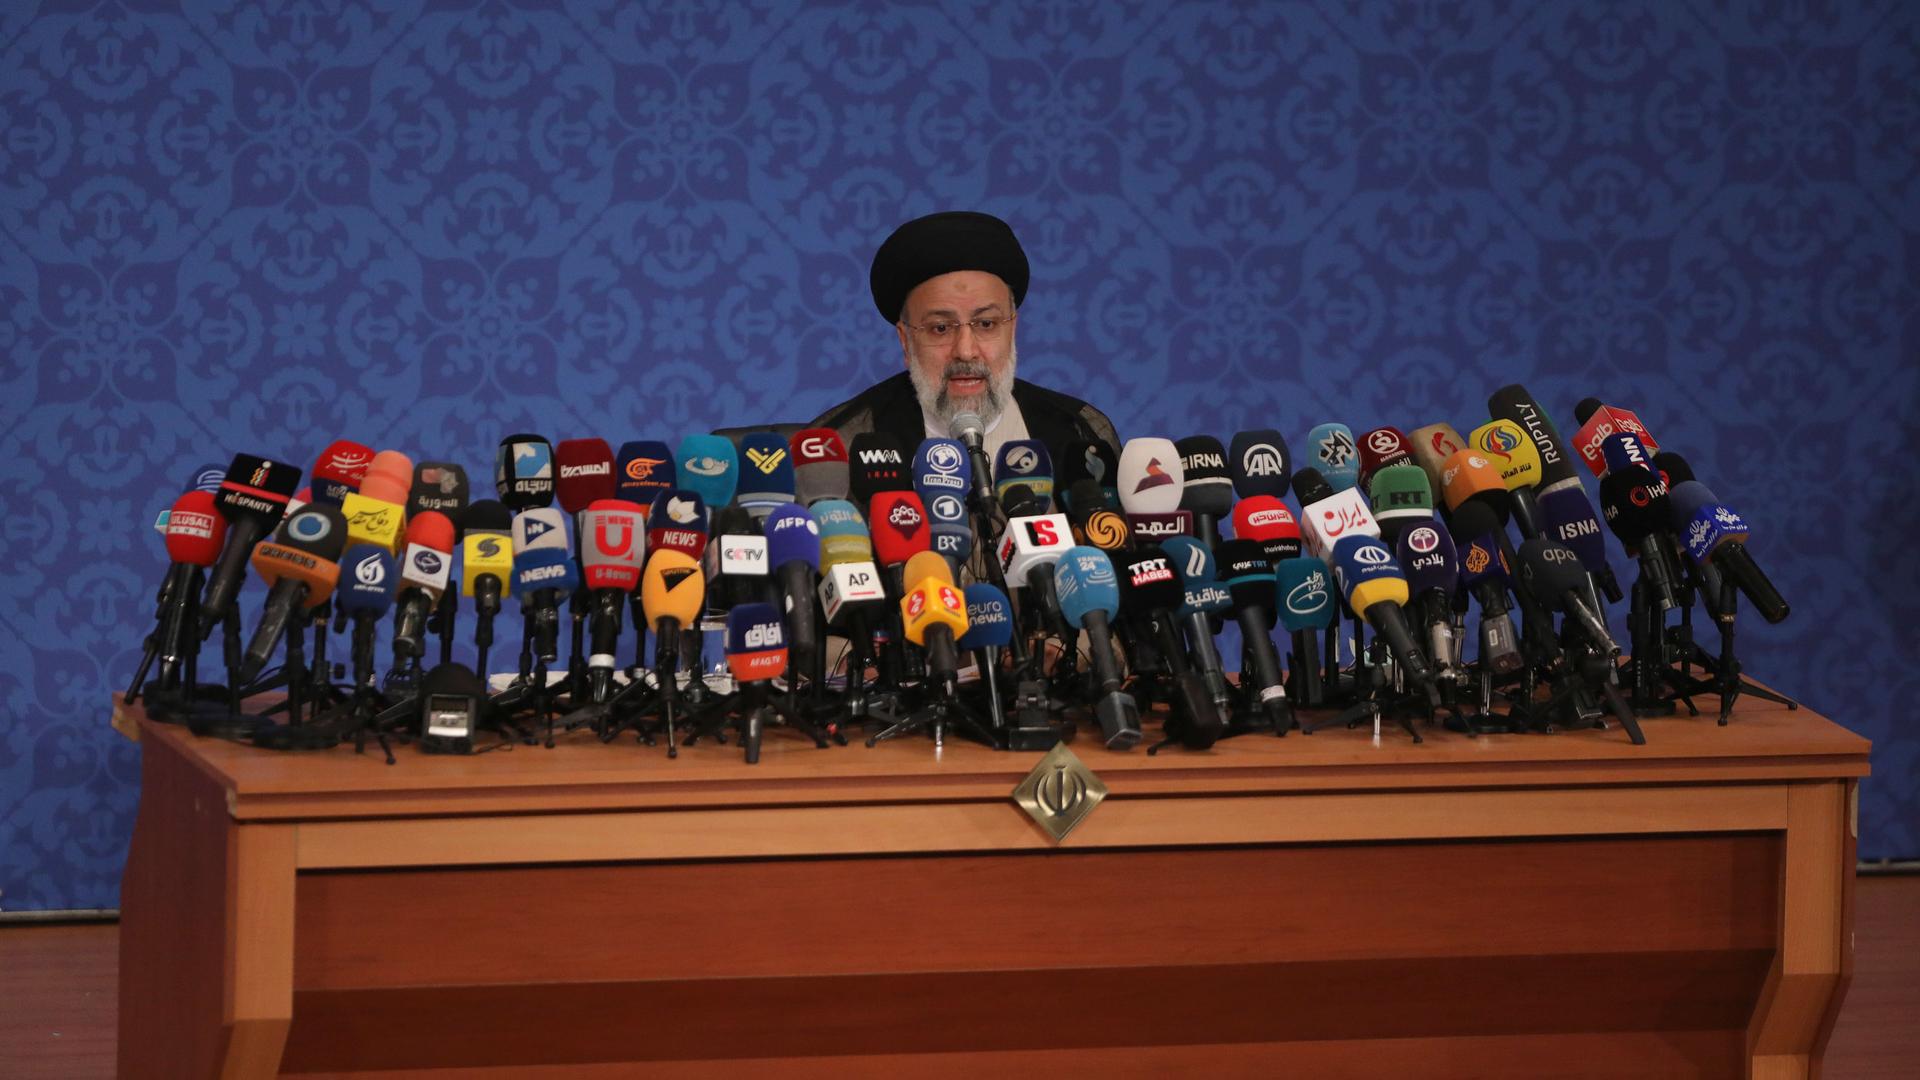 Iran's new President-elect Ebrahim Raisi is shown standing at a podium with several dozen microphones.